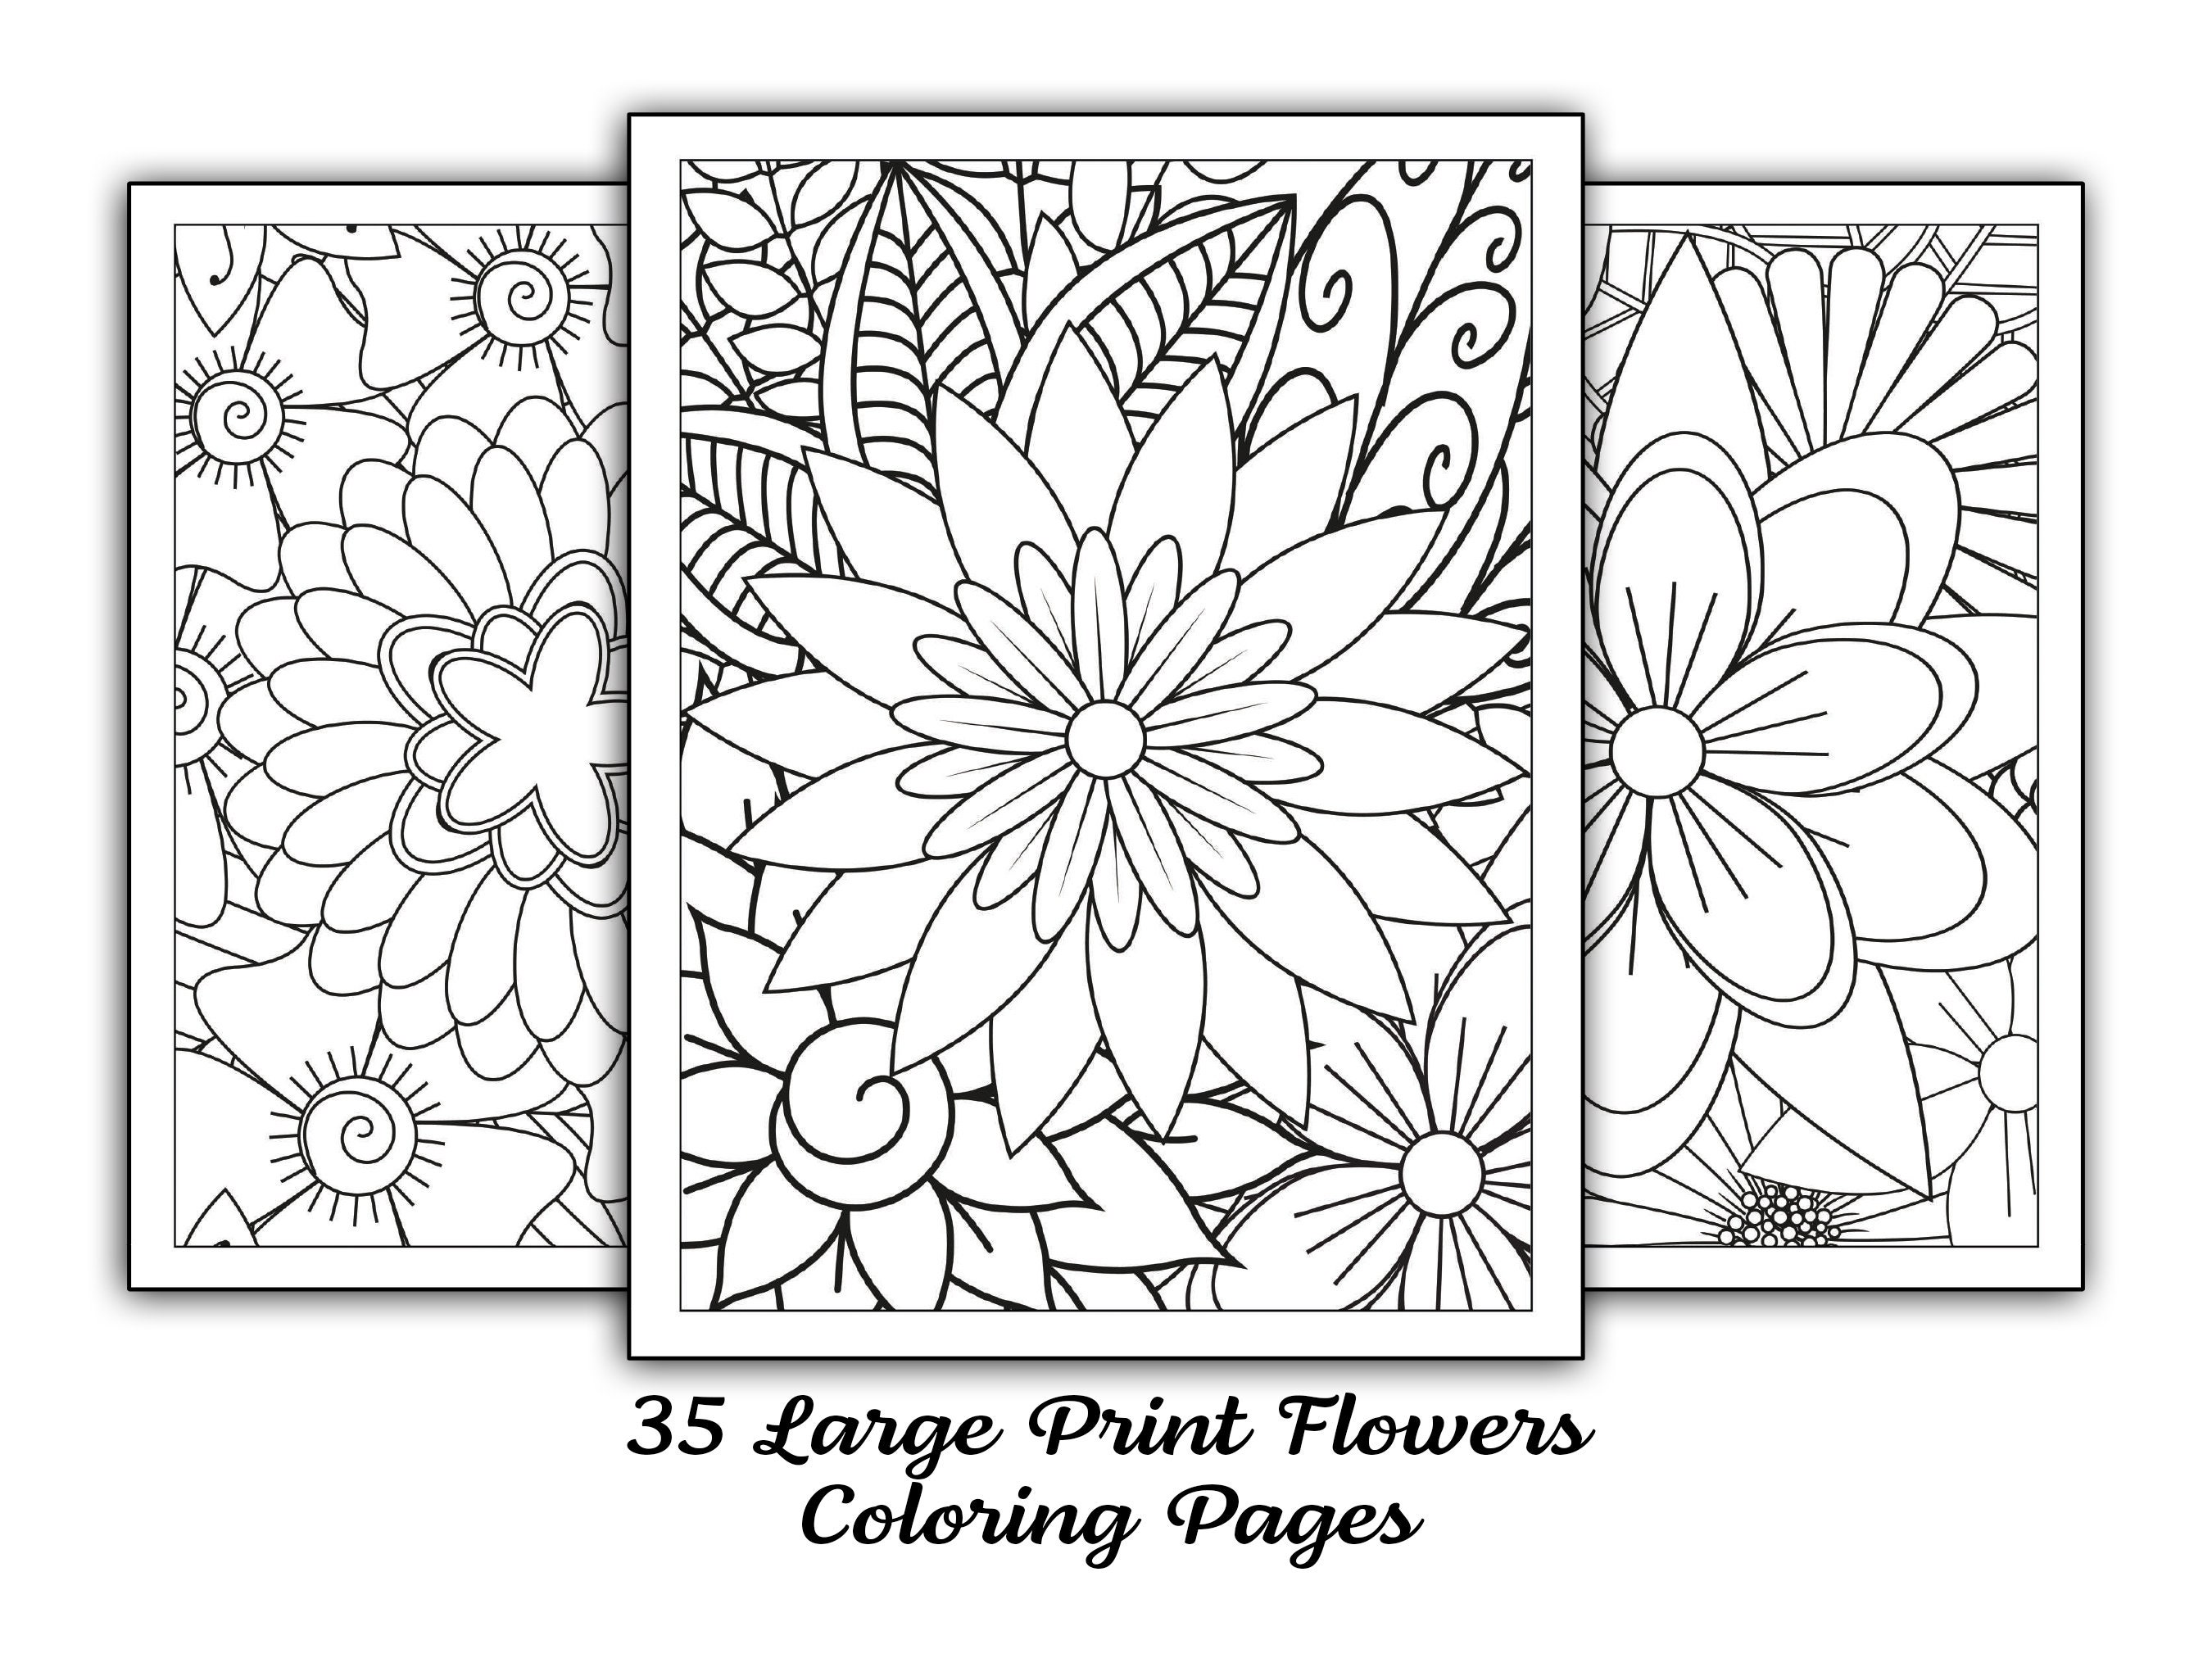 Premium Vector  Coloring book for adult and older children coloring page  with flowers pattern frame